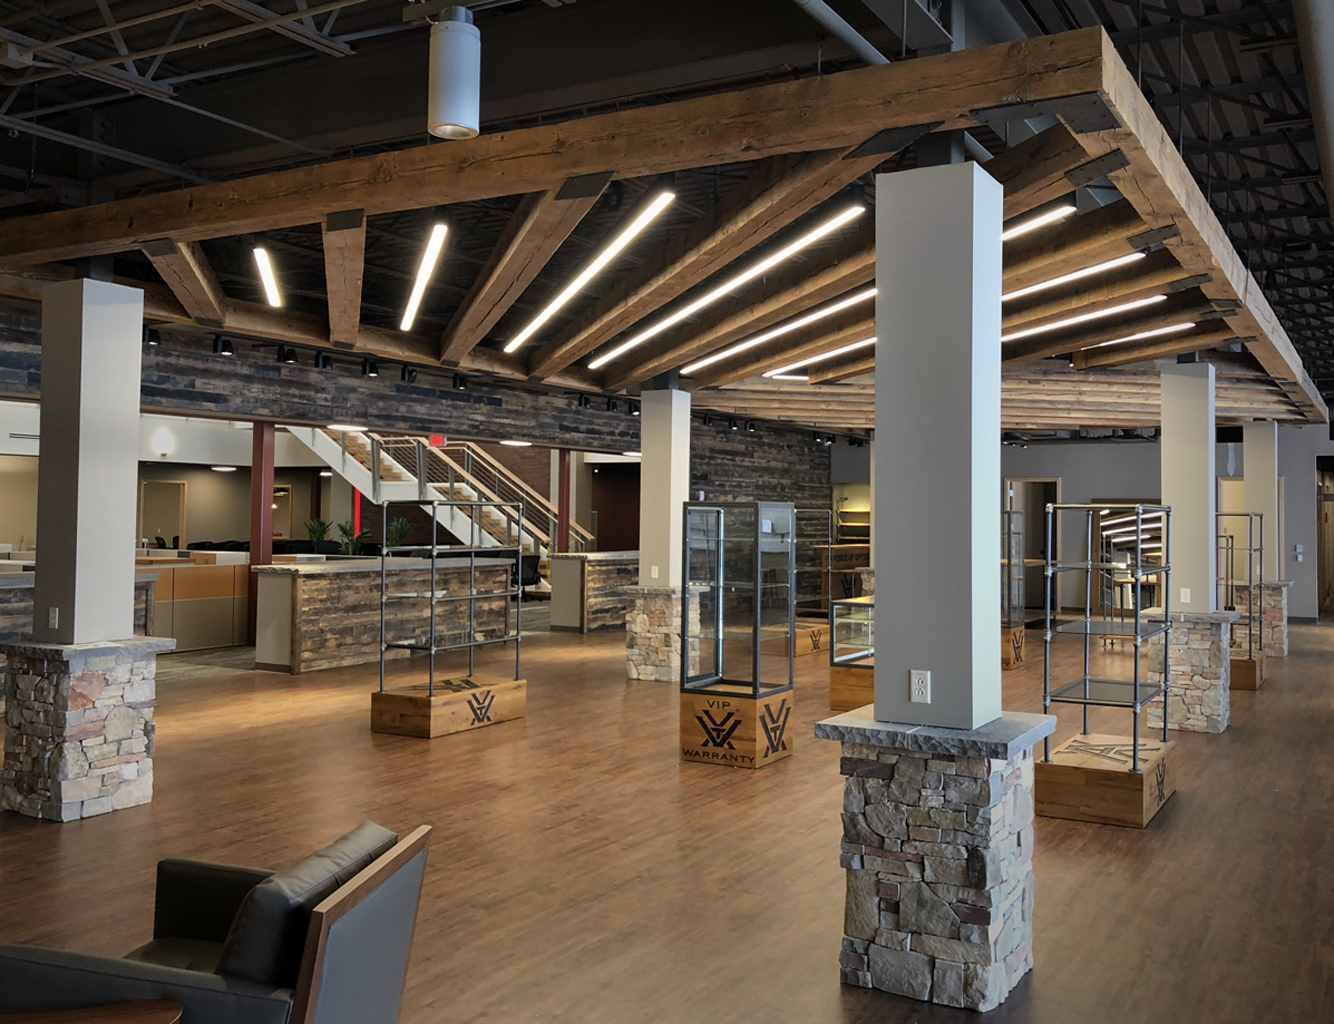 Solid Wood Opportunities for Commercial Spaces